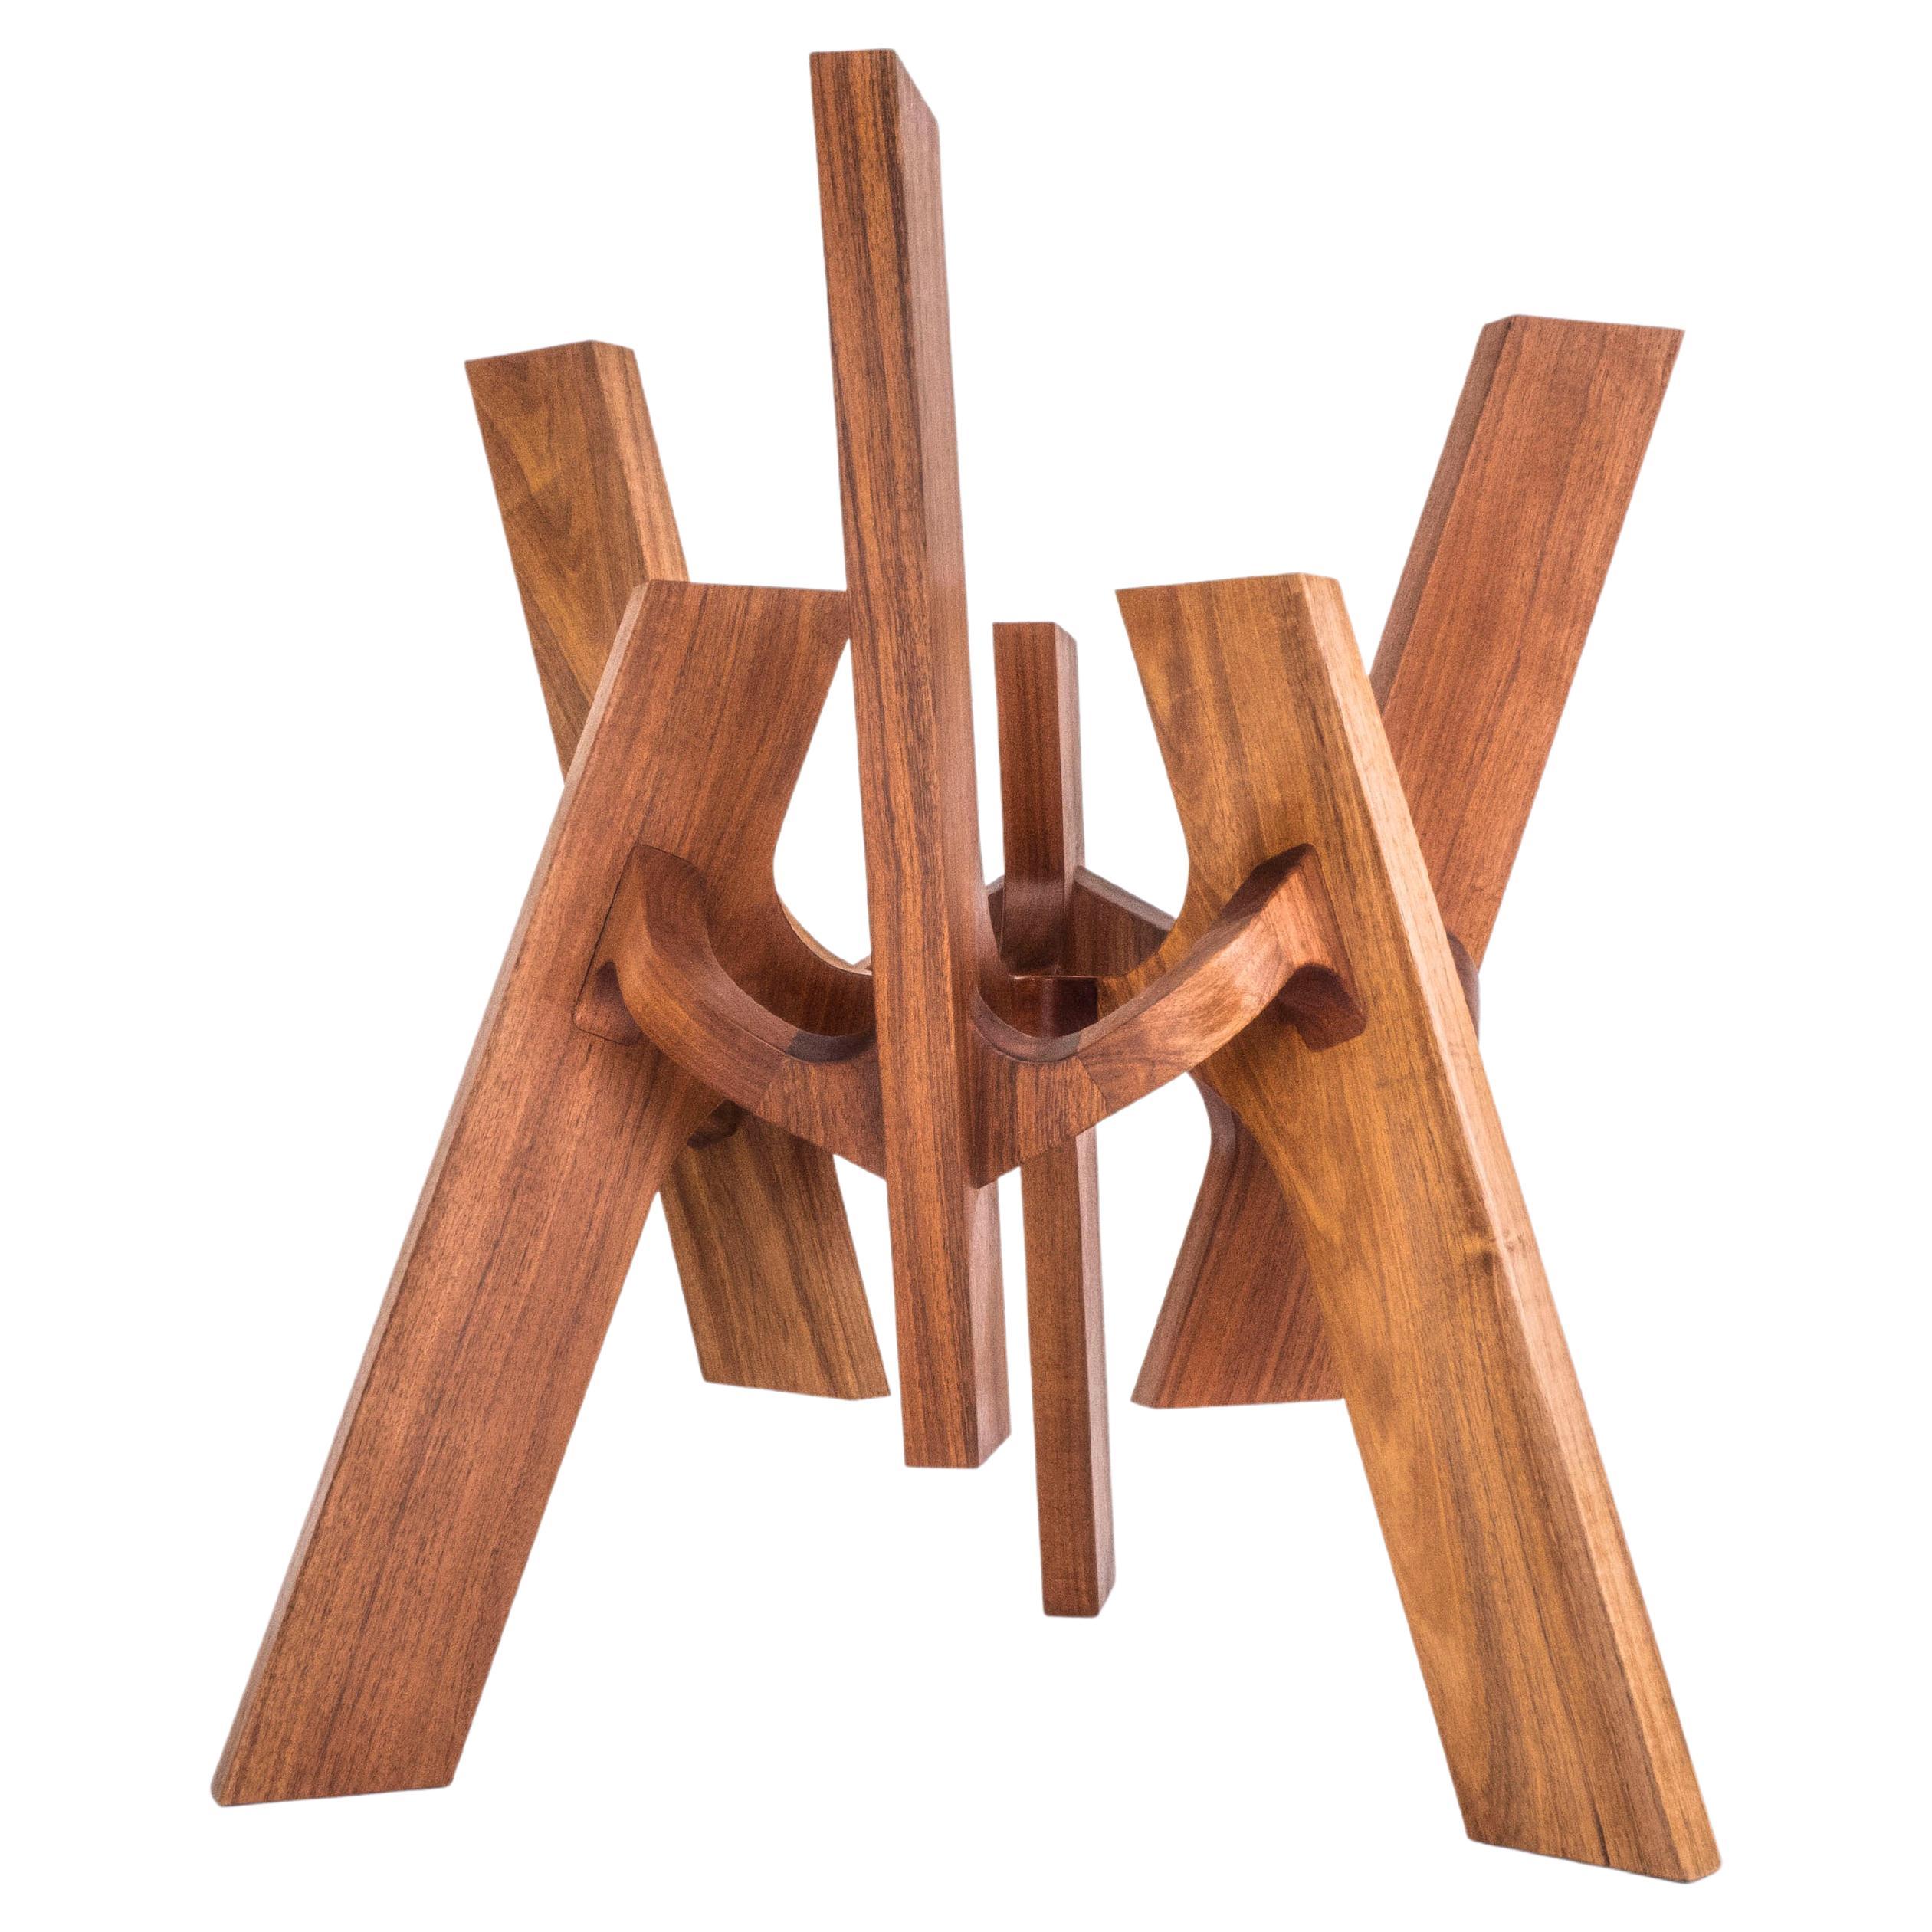 Astra, Geometric Sculptural Center Table Made of Solid Wood by Pedro Cerisola For Sale